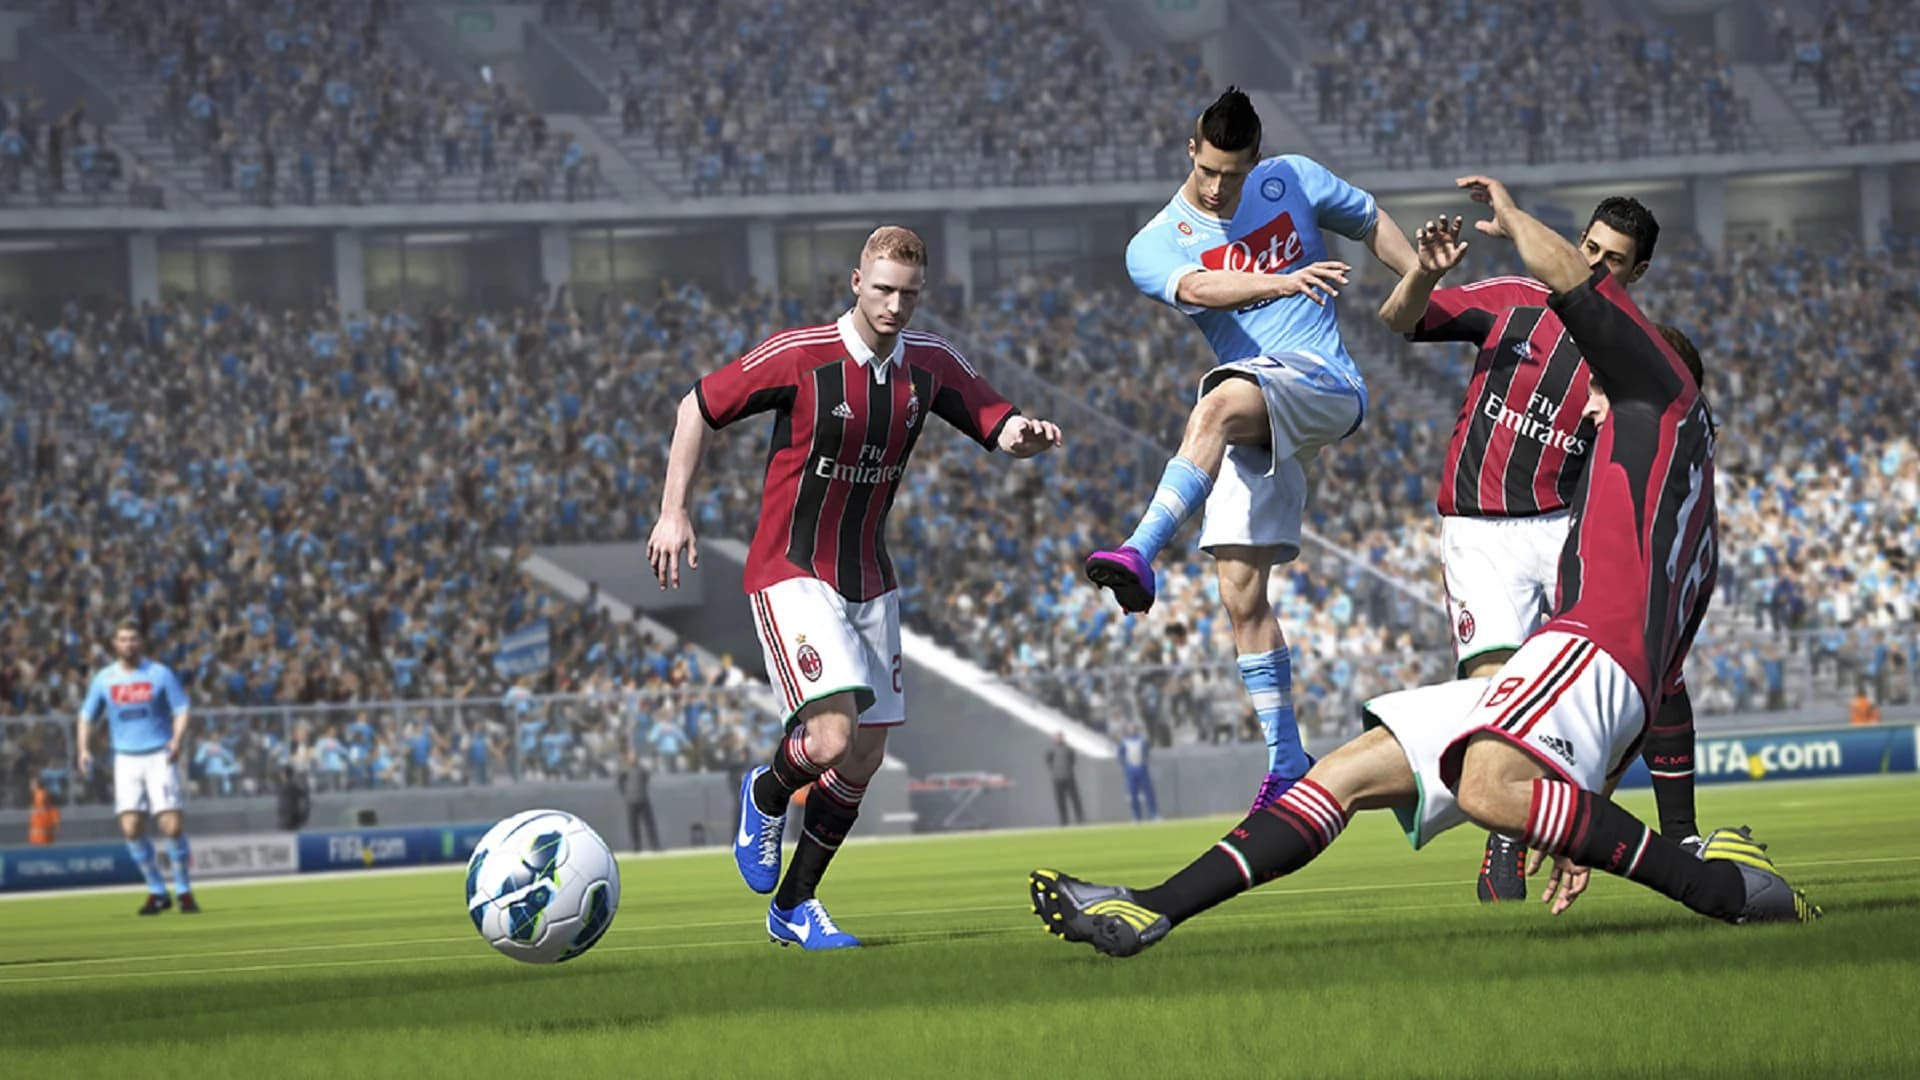 EA Sports and FIFA end partnership, both eye new video games